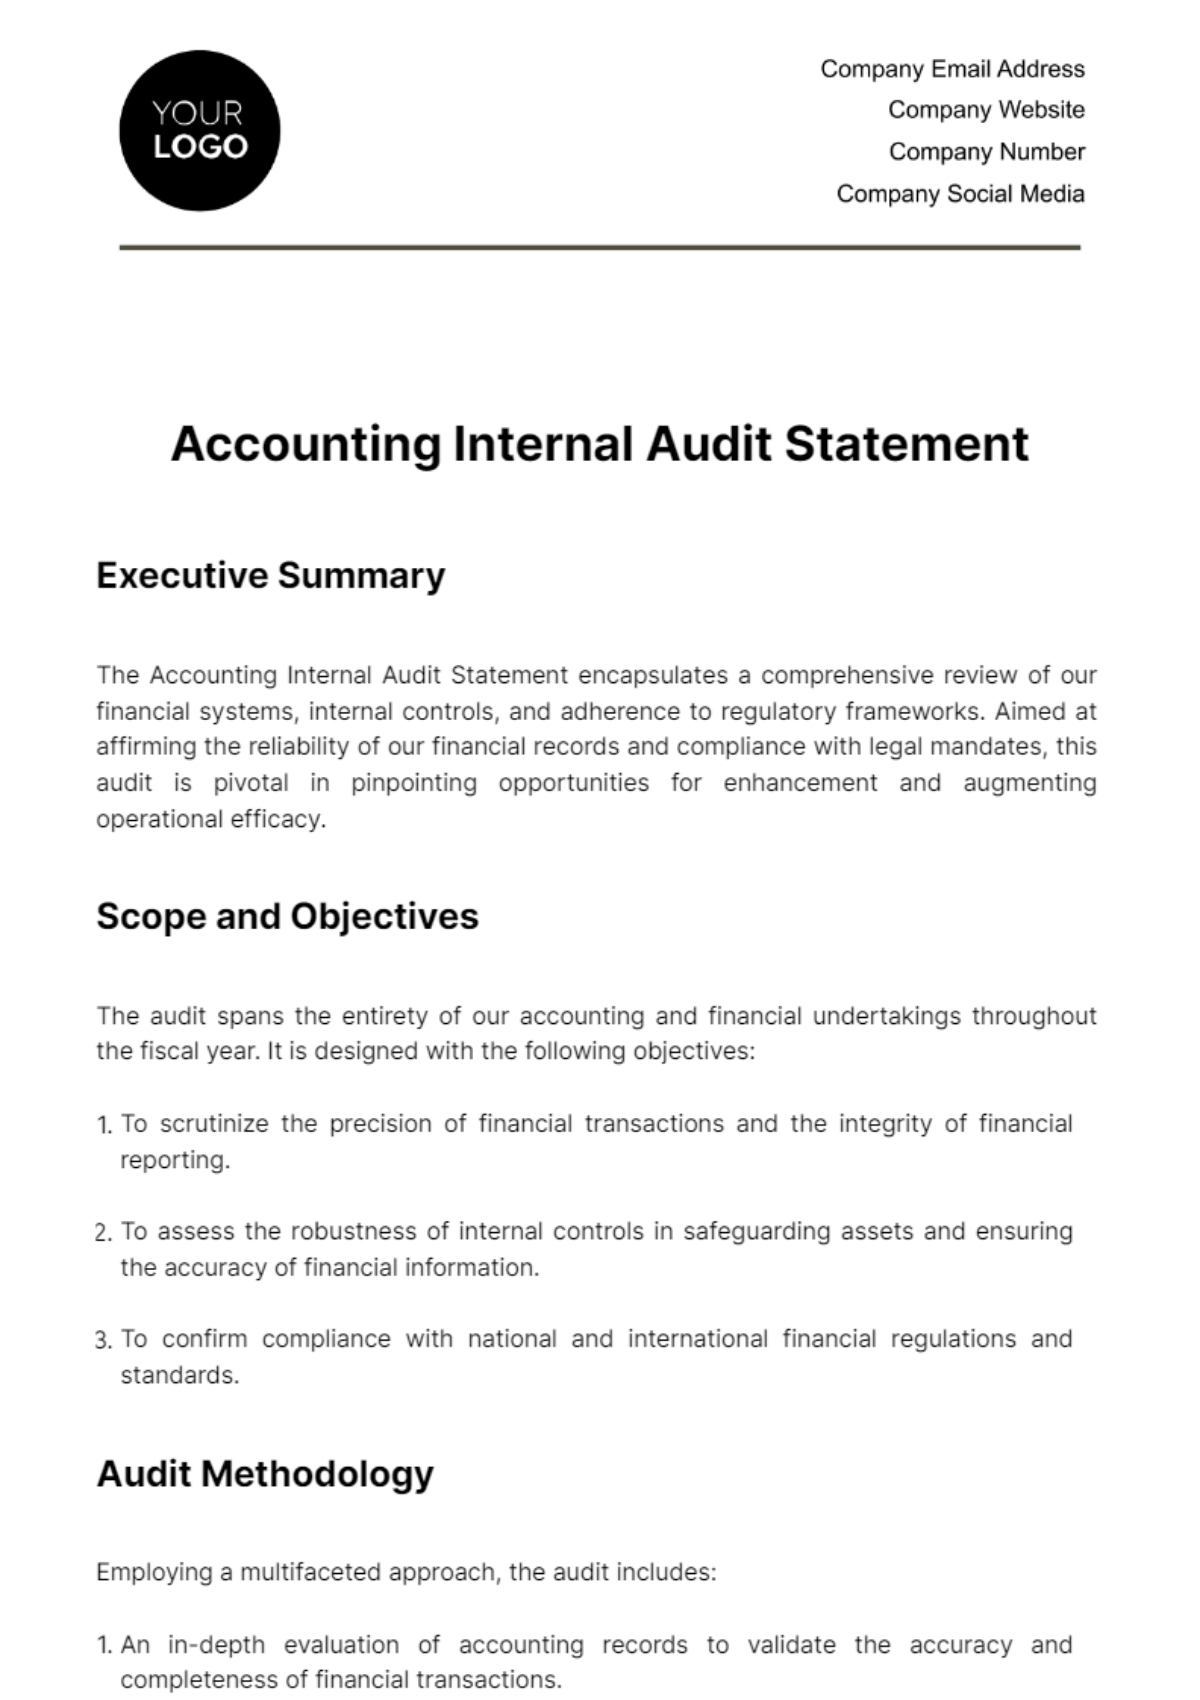 Free Accounting Internal Audit Statement Template